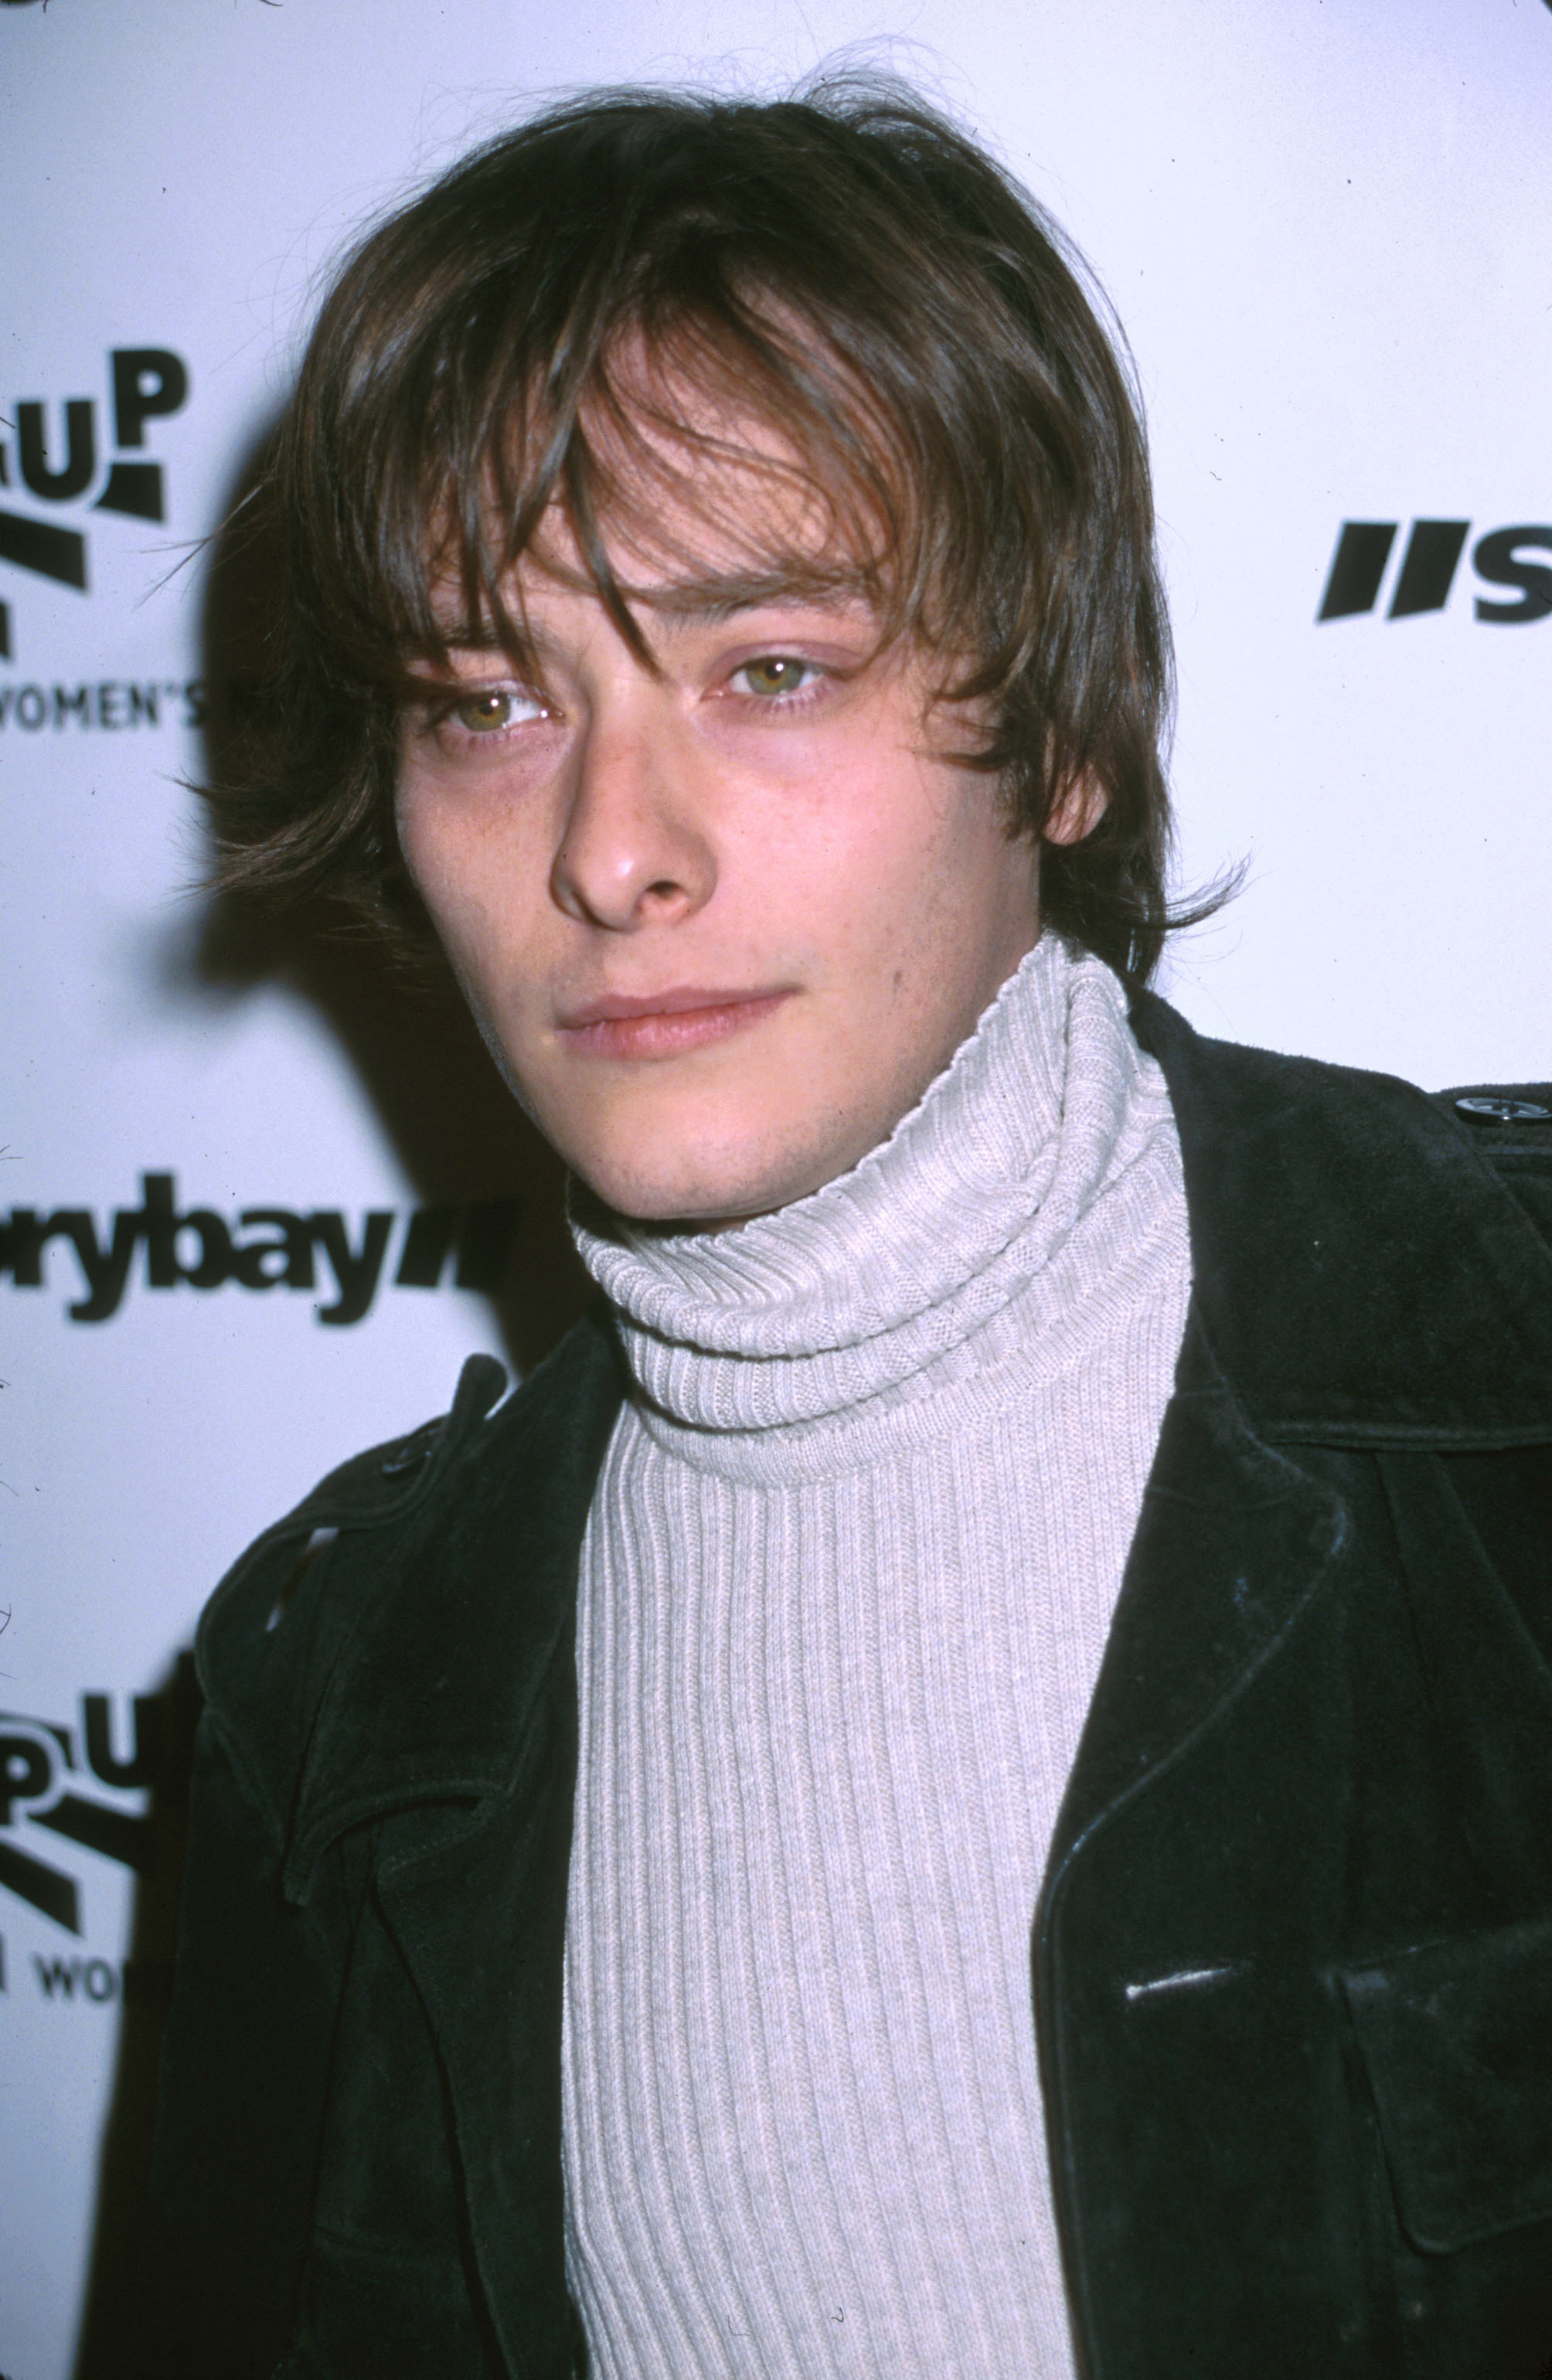 Edward Furlong at the Reata Restaurant in Beverly Hills, California, for the Step Up Holiday Party in 2000 | Source: Getty Images